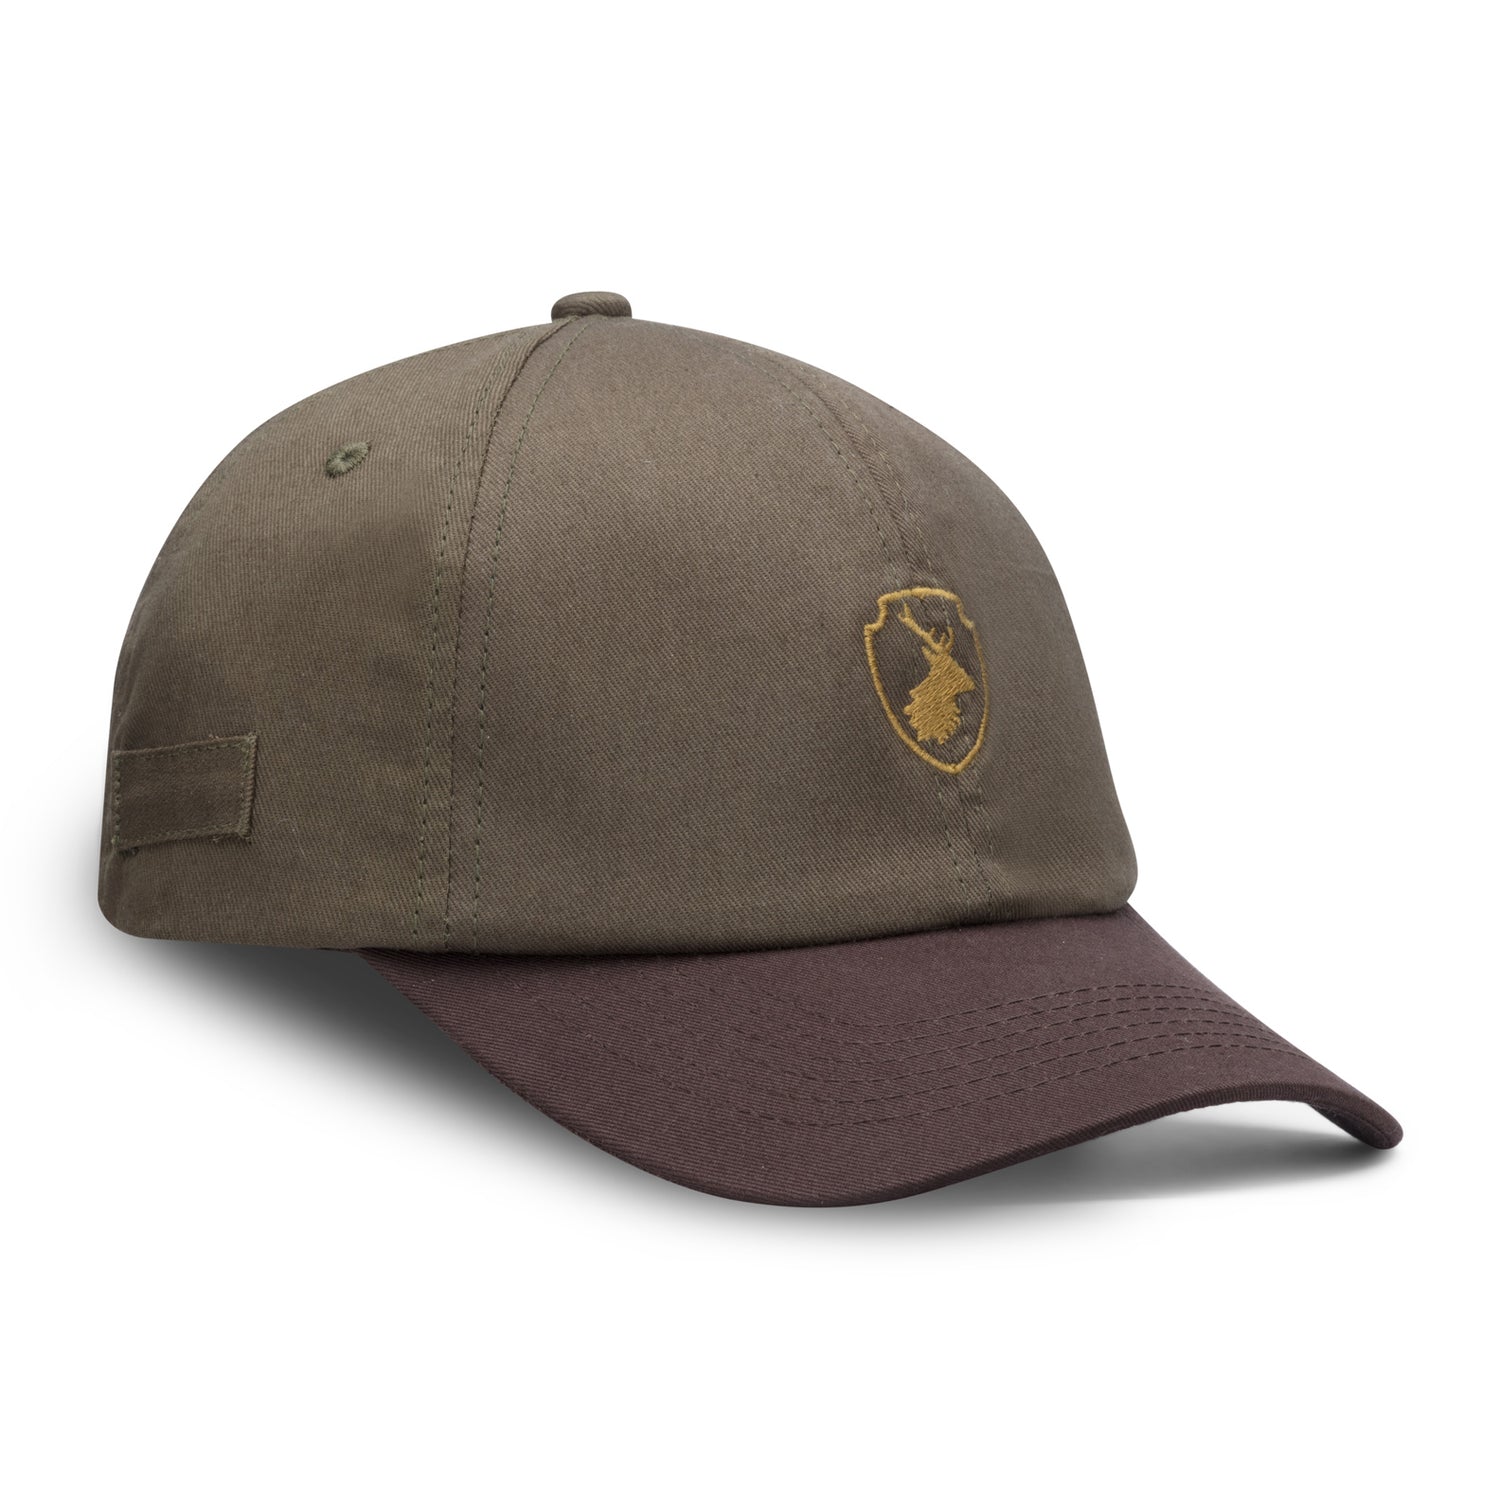 New-Forest-Stag-Baseball-Cap